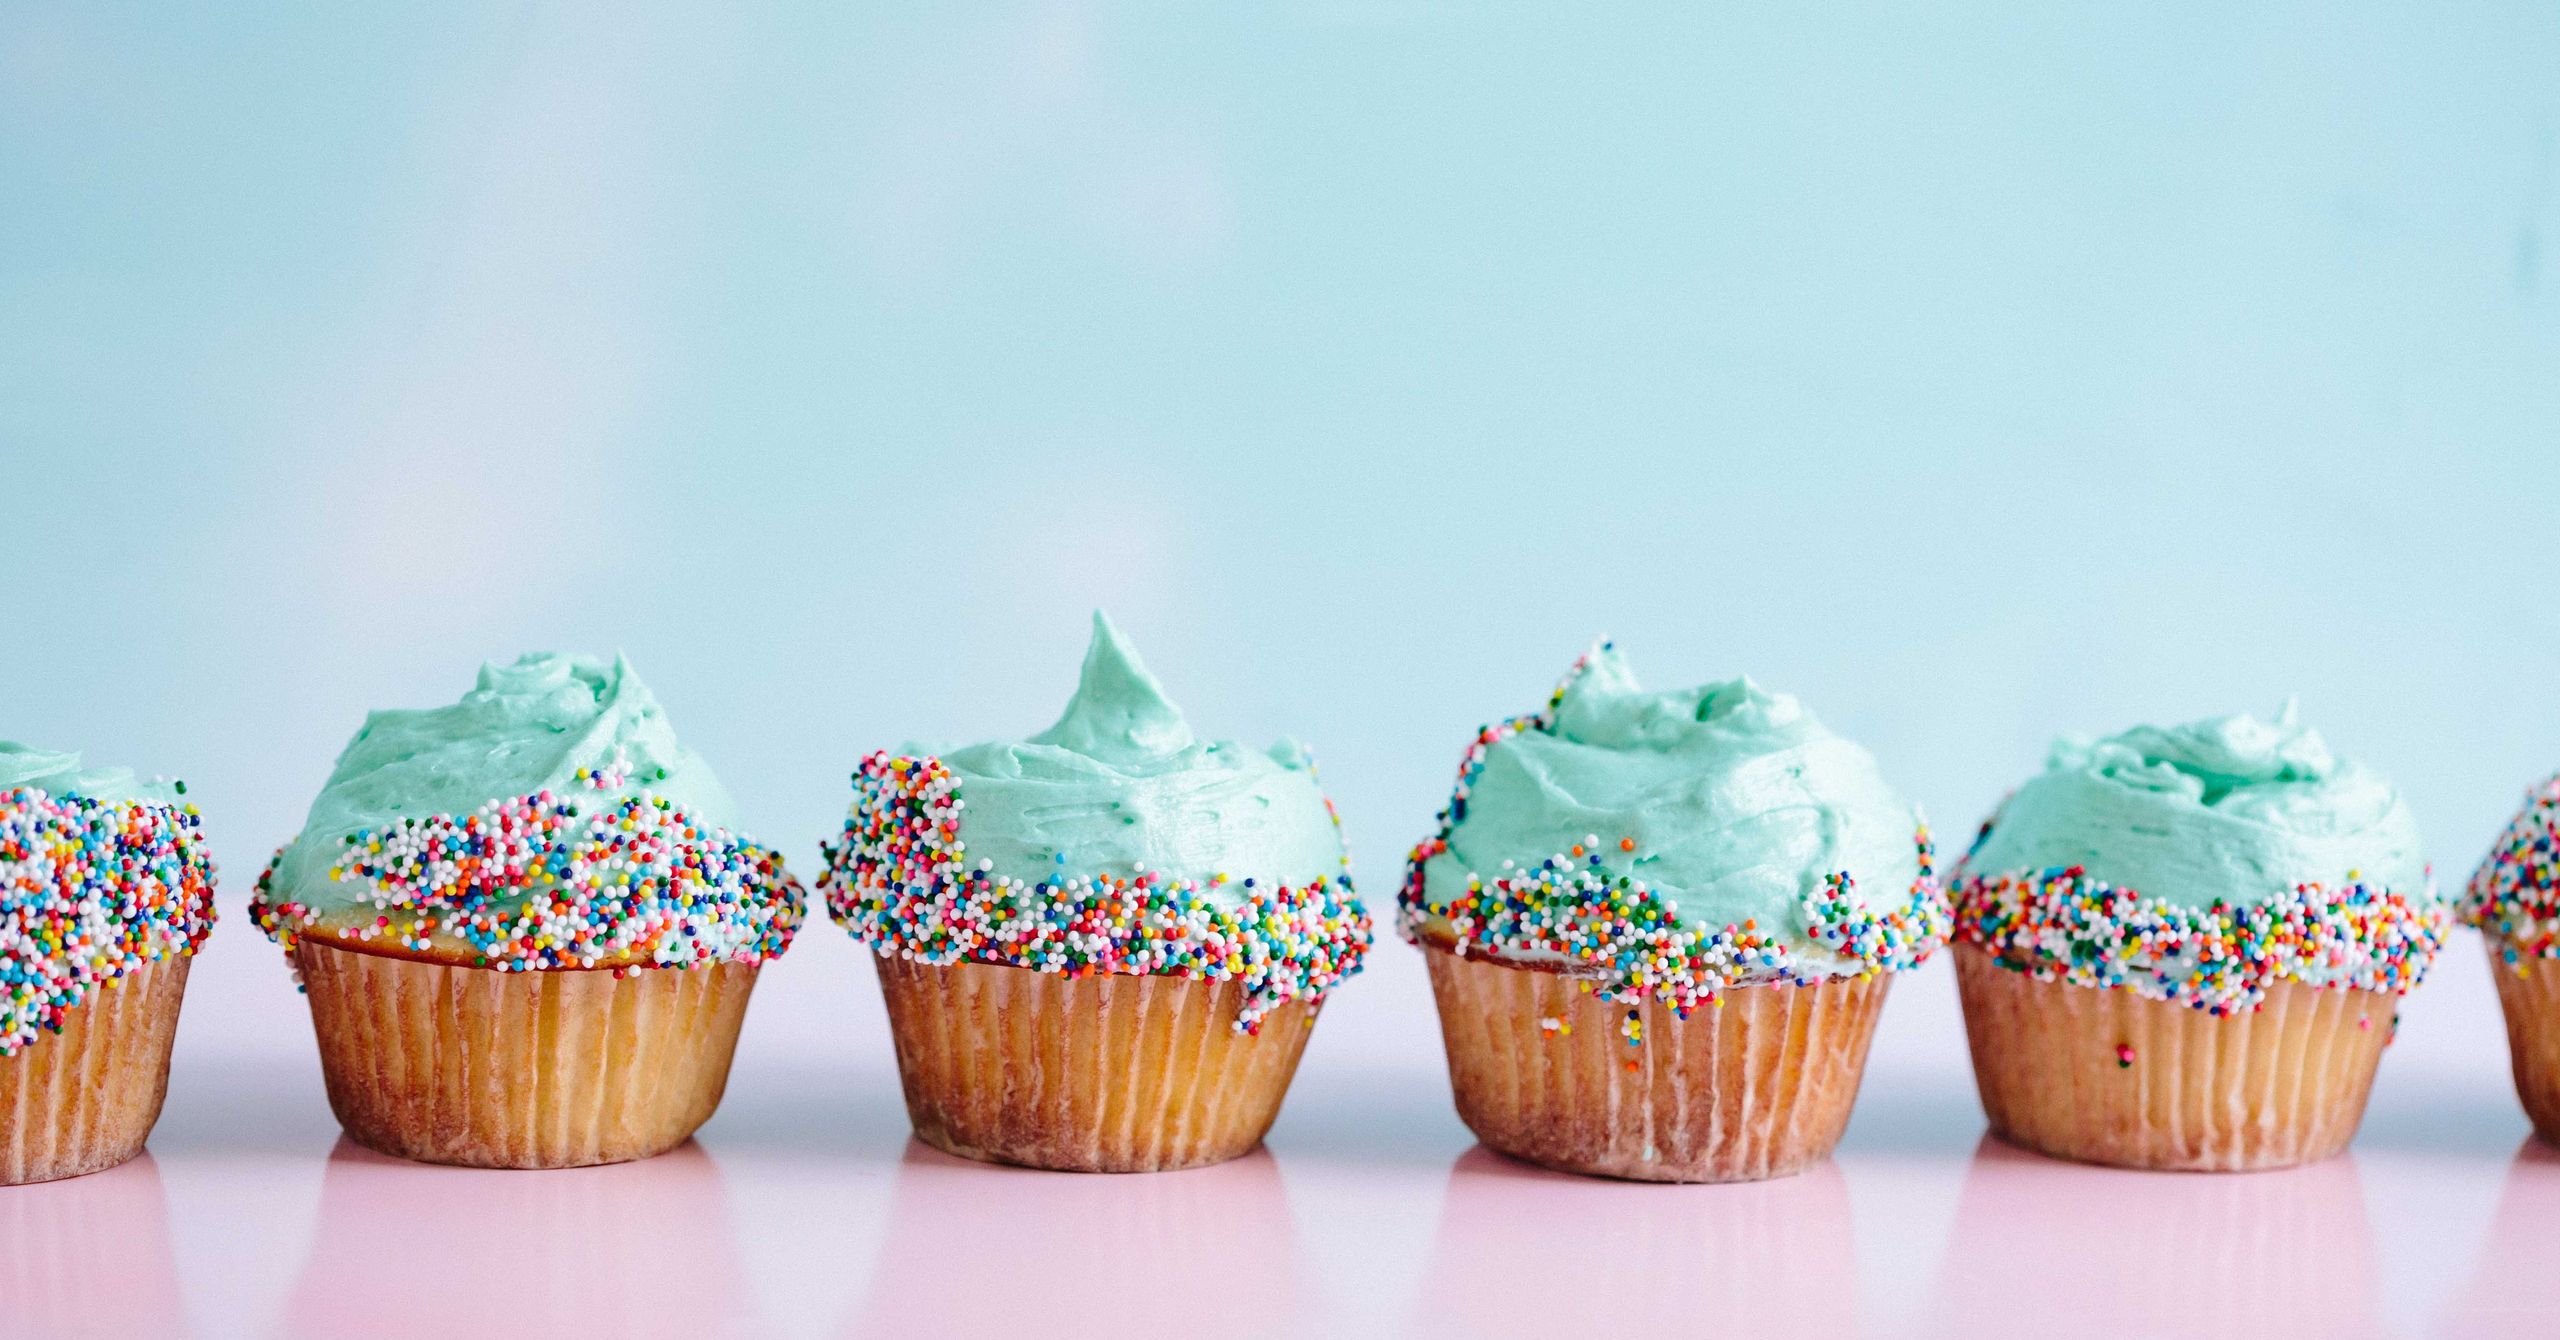 Teal icing cupcakes decorated with sprinkles